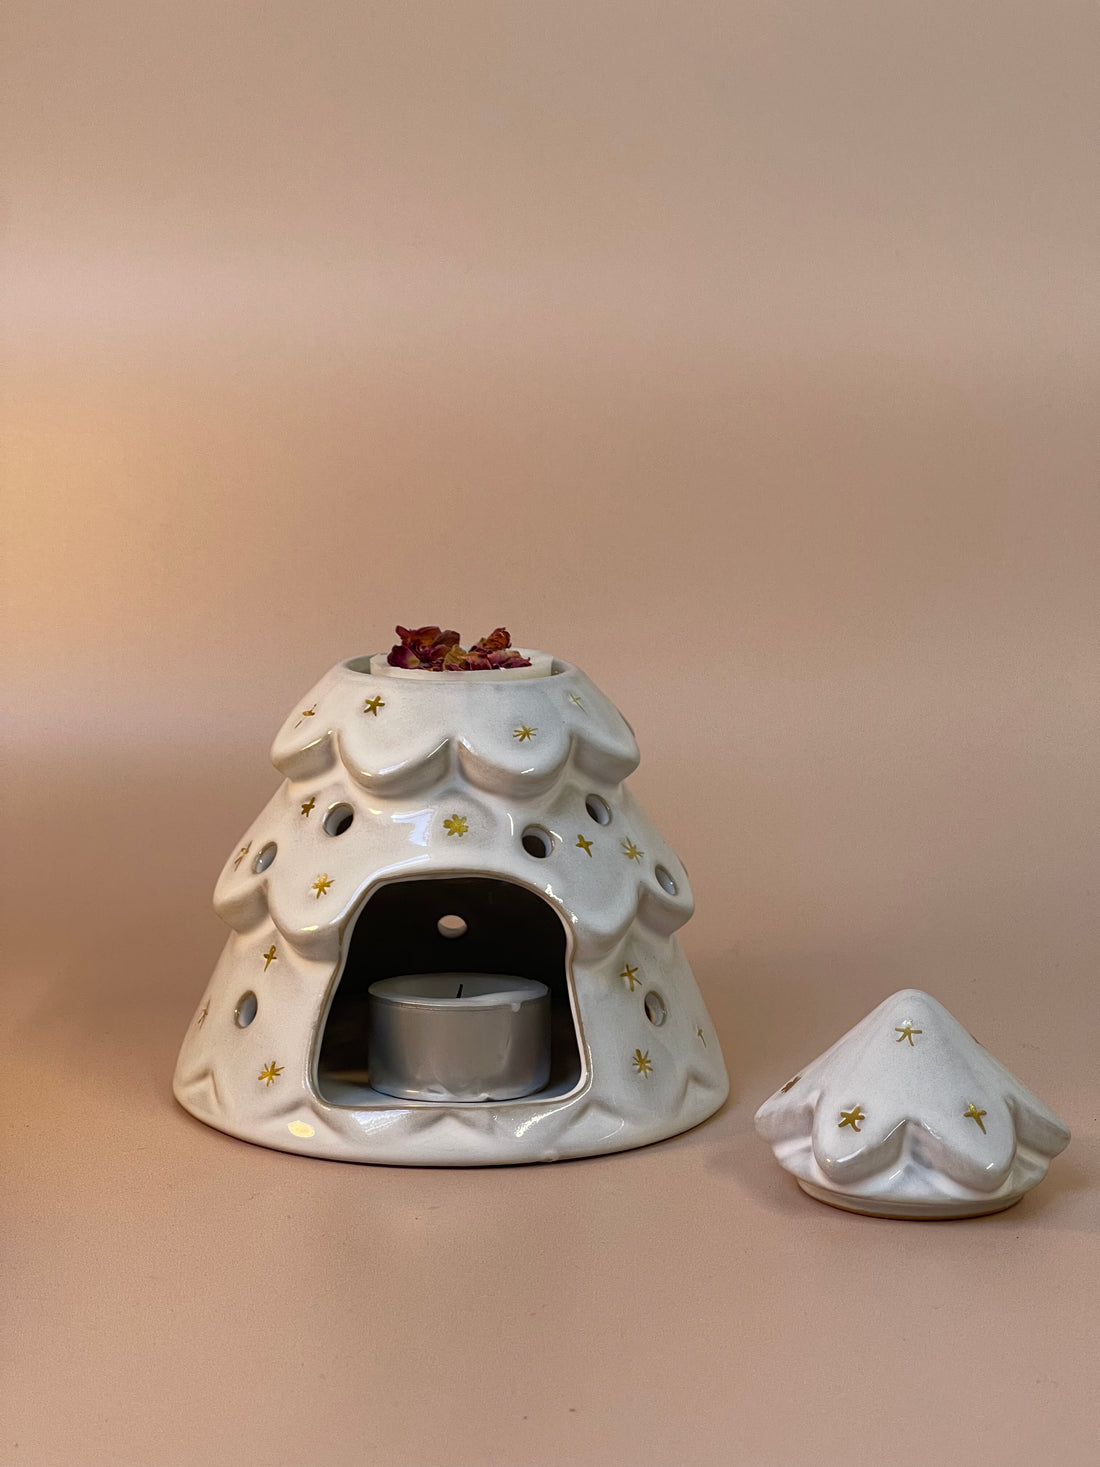 Christmas tree-shaped wax melt burner adorned with festive details, ideal for melting wax melts and spreading delightful holiday fragrances throughout your home.